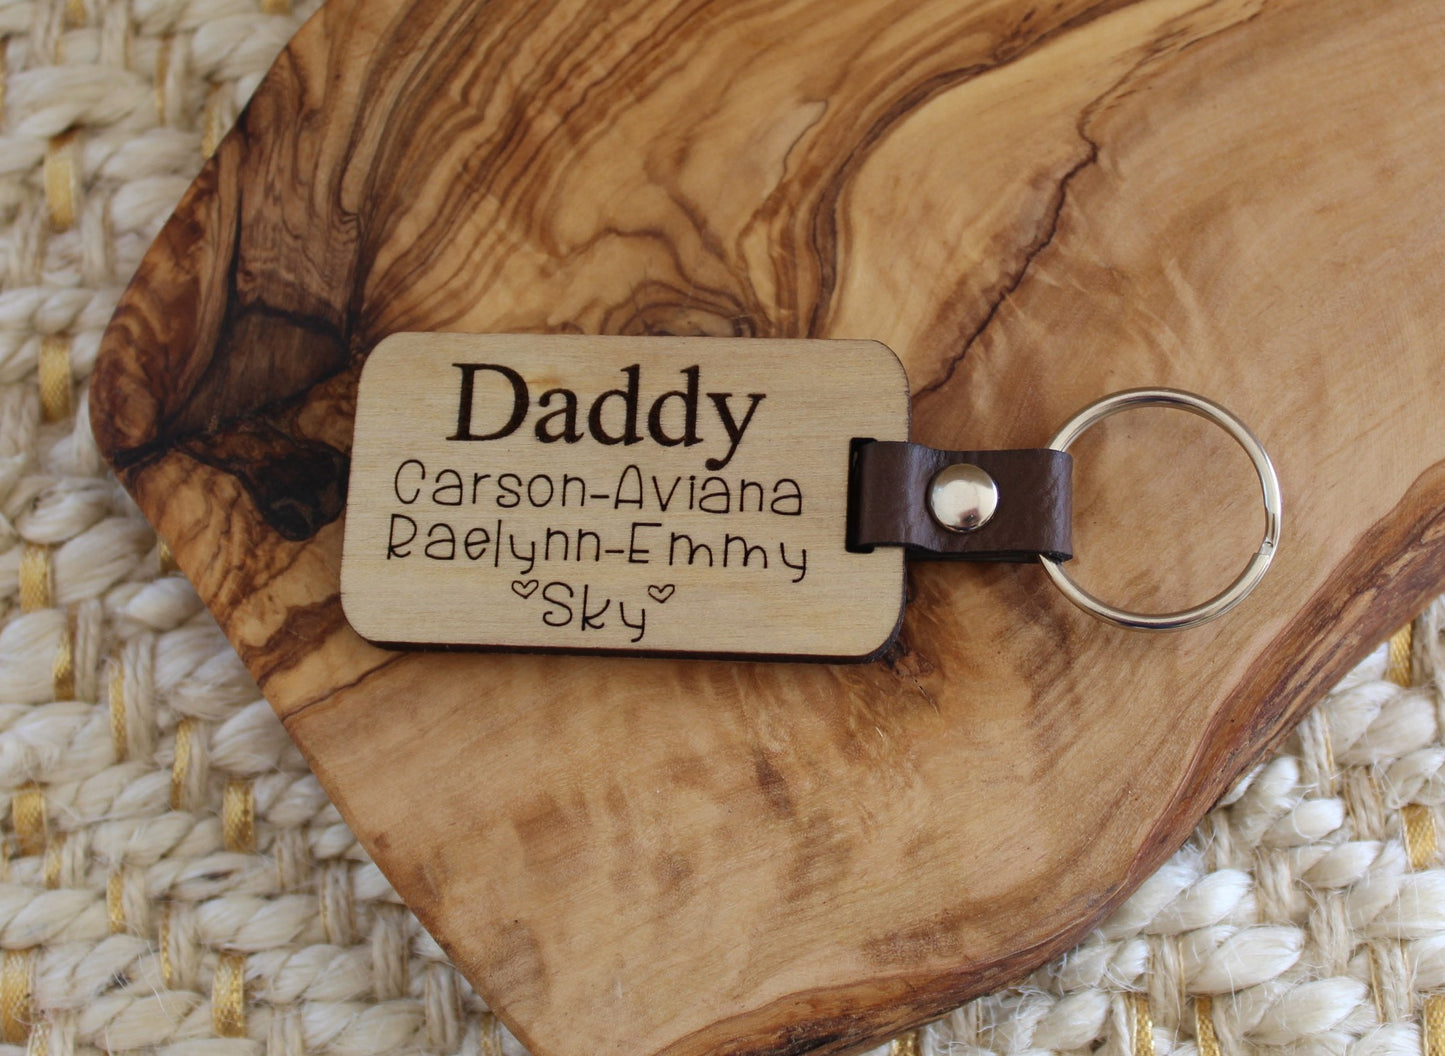 Mother, mom, mama keychain-Personalized-Engraved